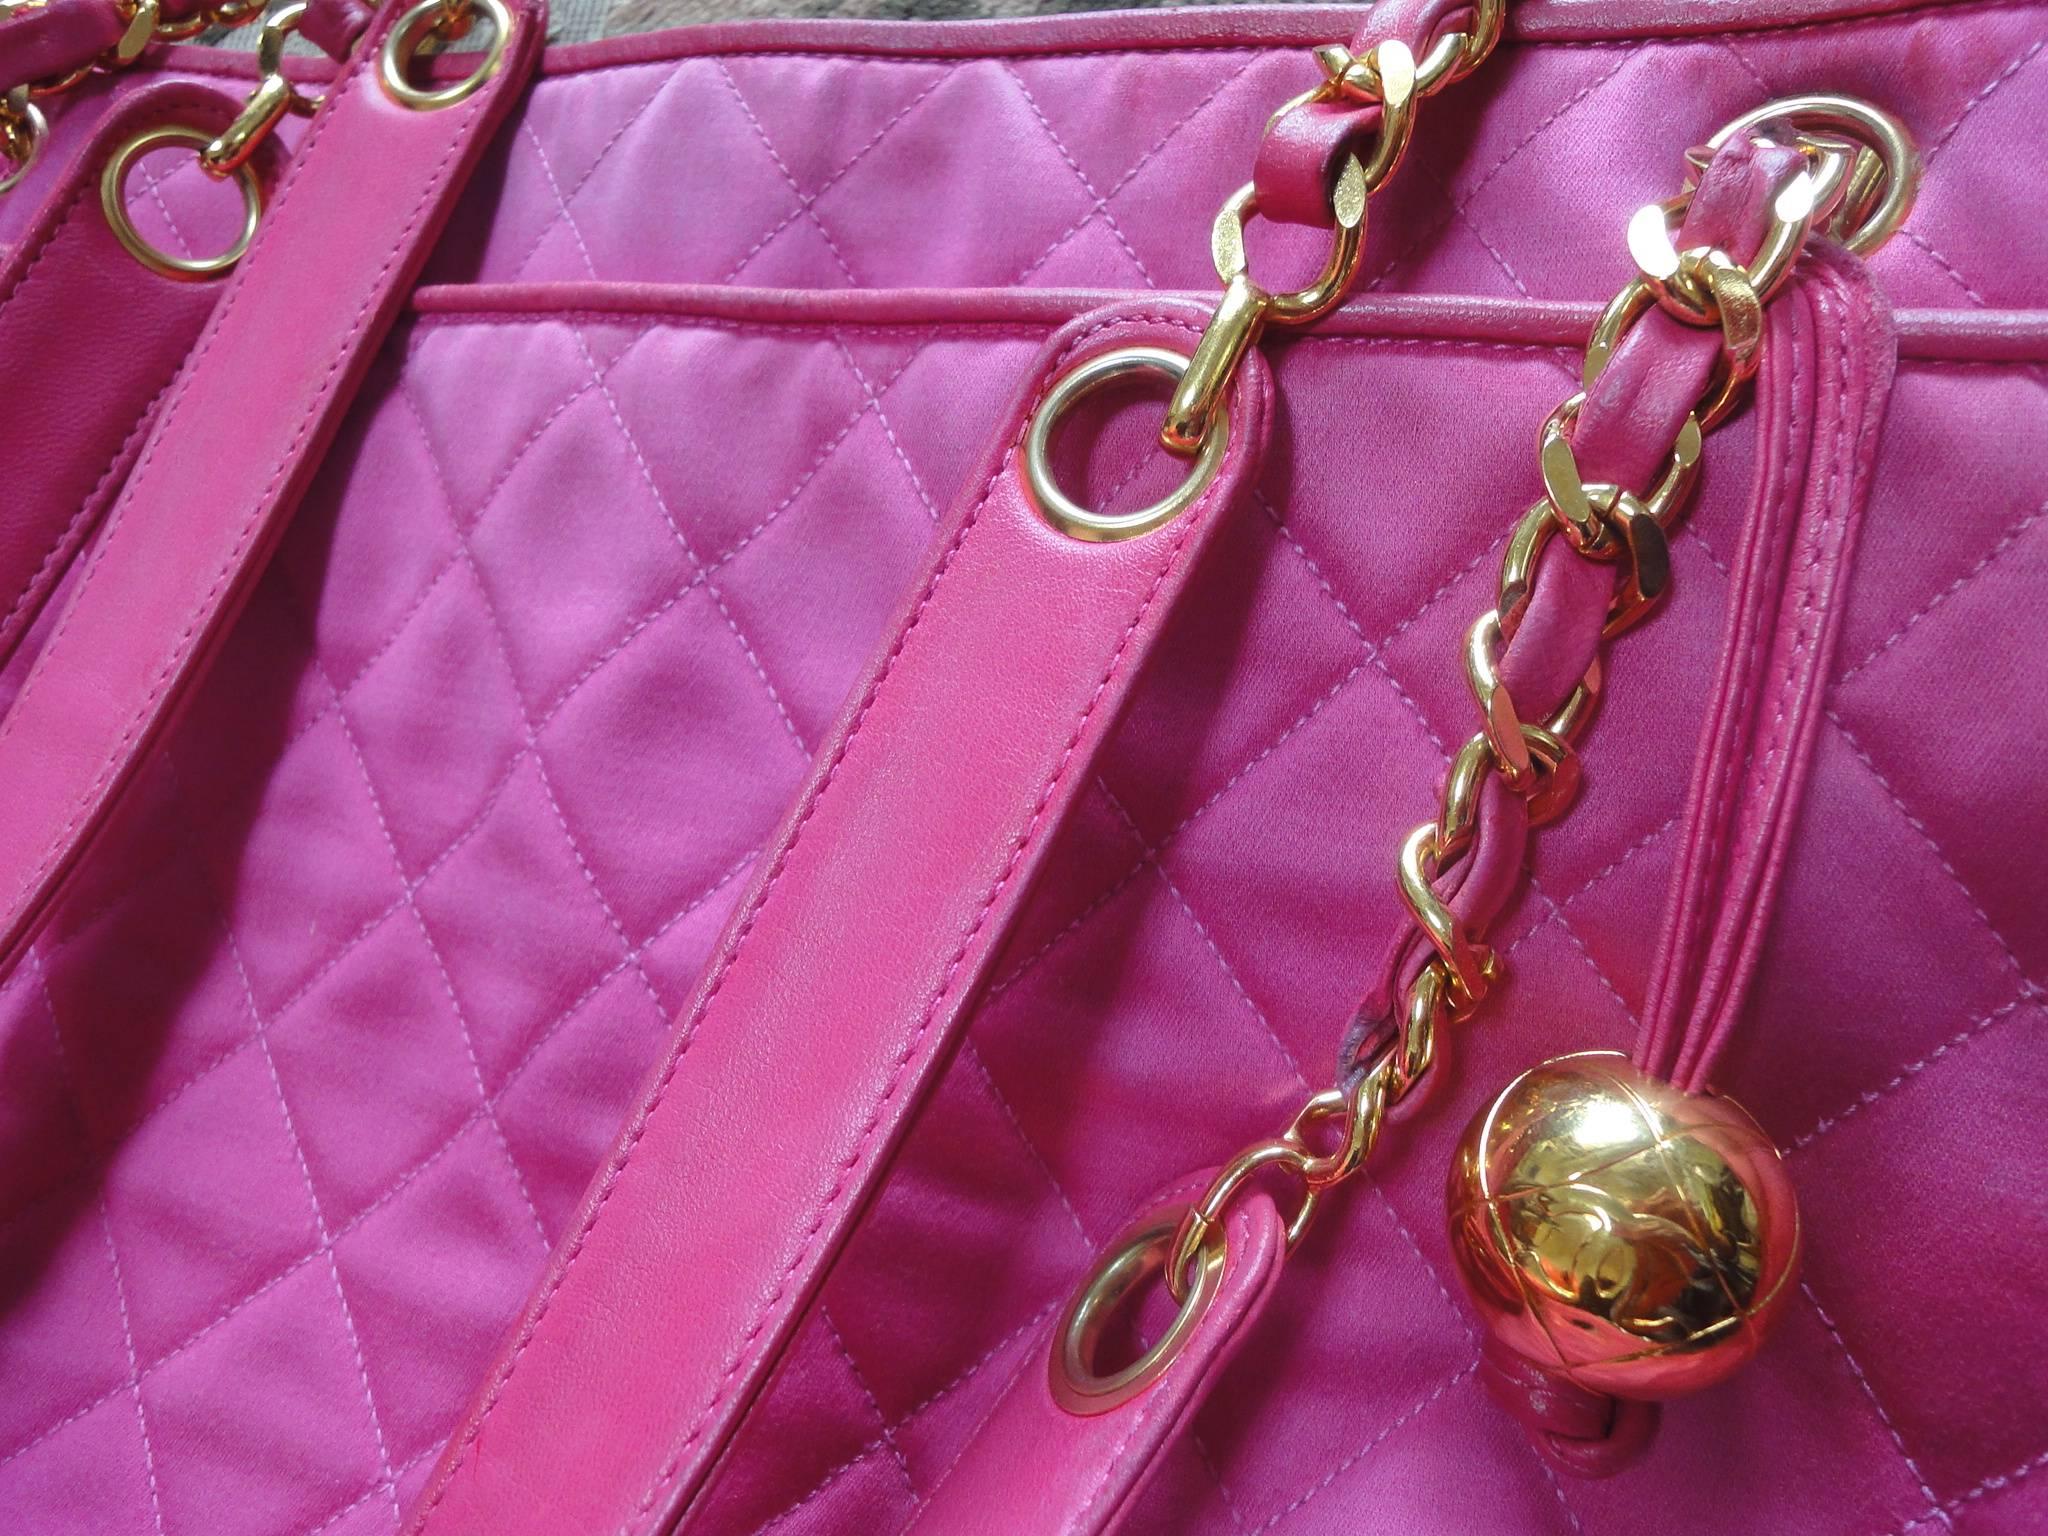 Vintage CHANEL bright pink shoulder tote bag with quilted satin and leather 4